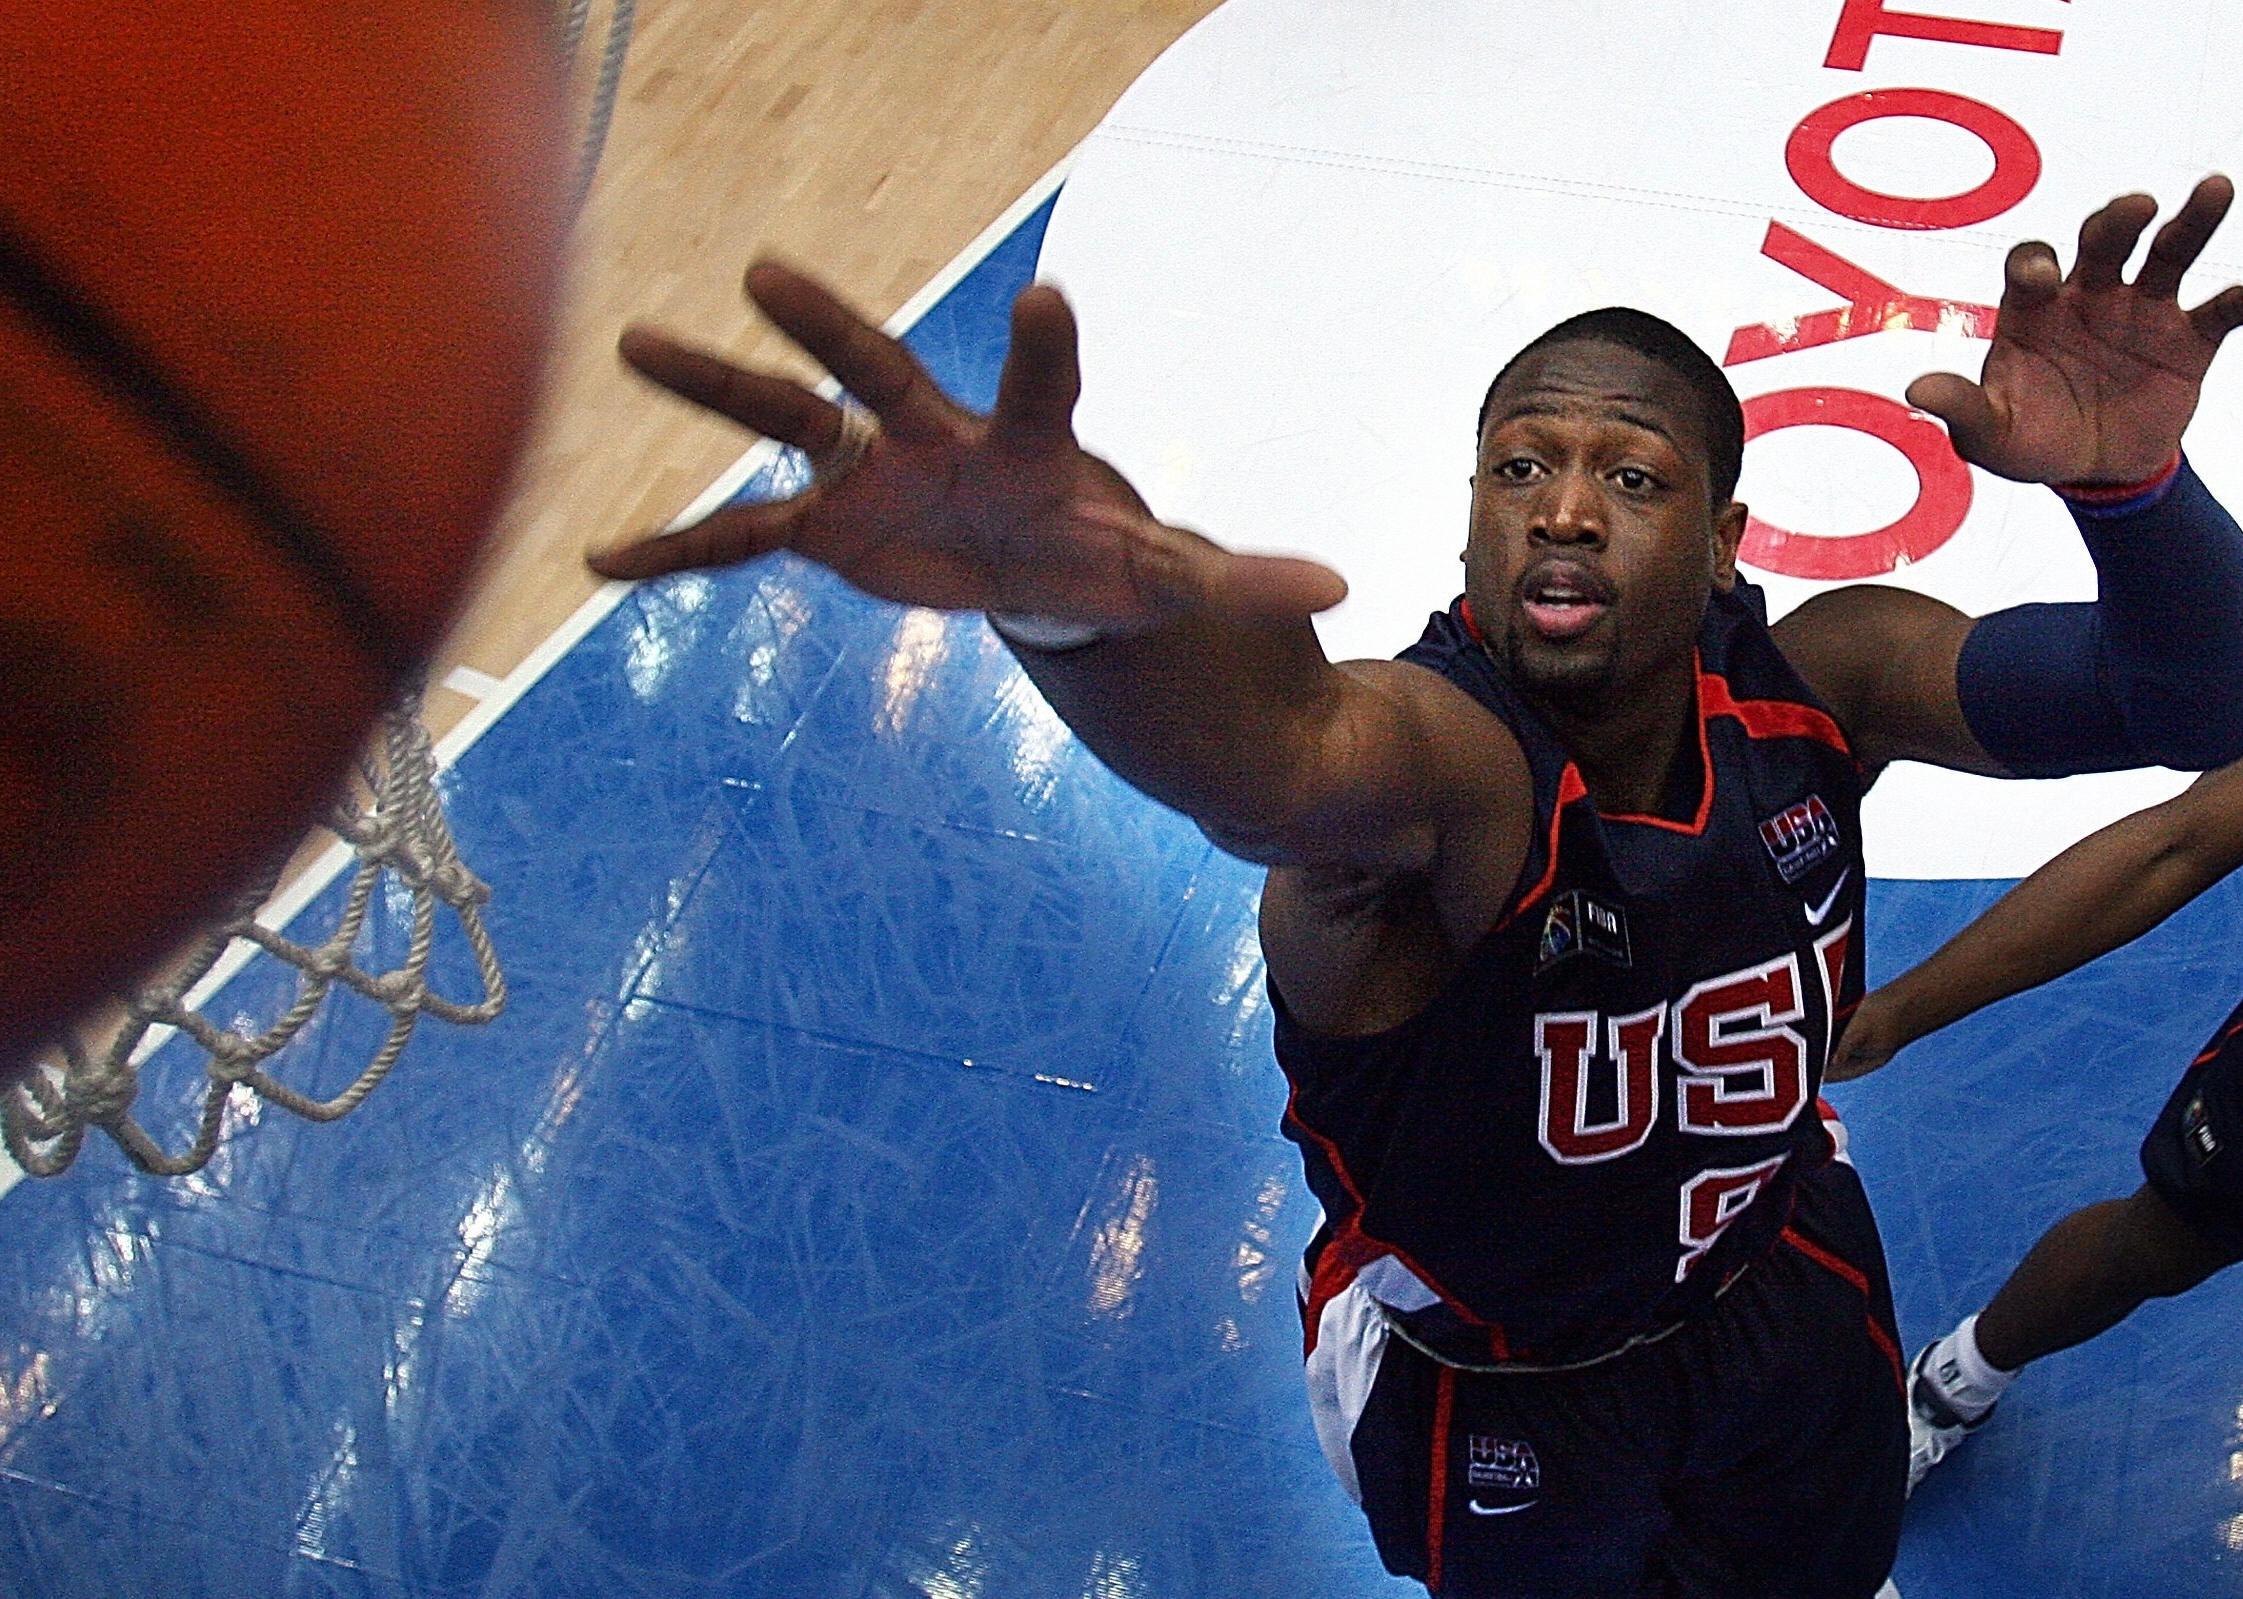 Dwyane Wade of the US jumps for a rebound.